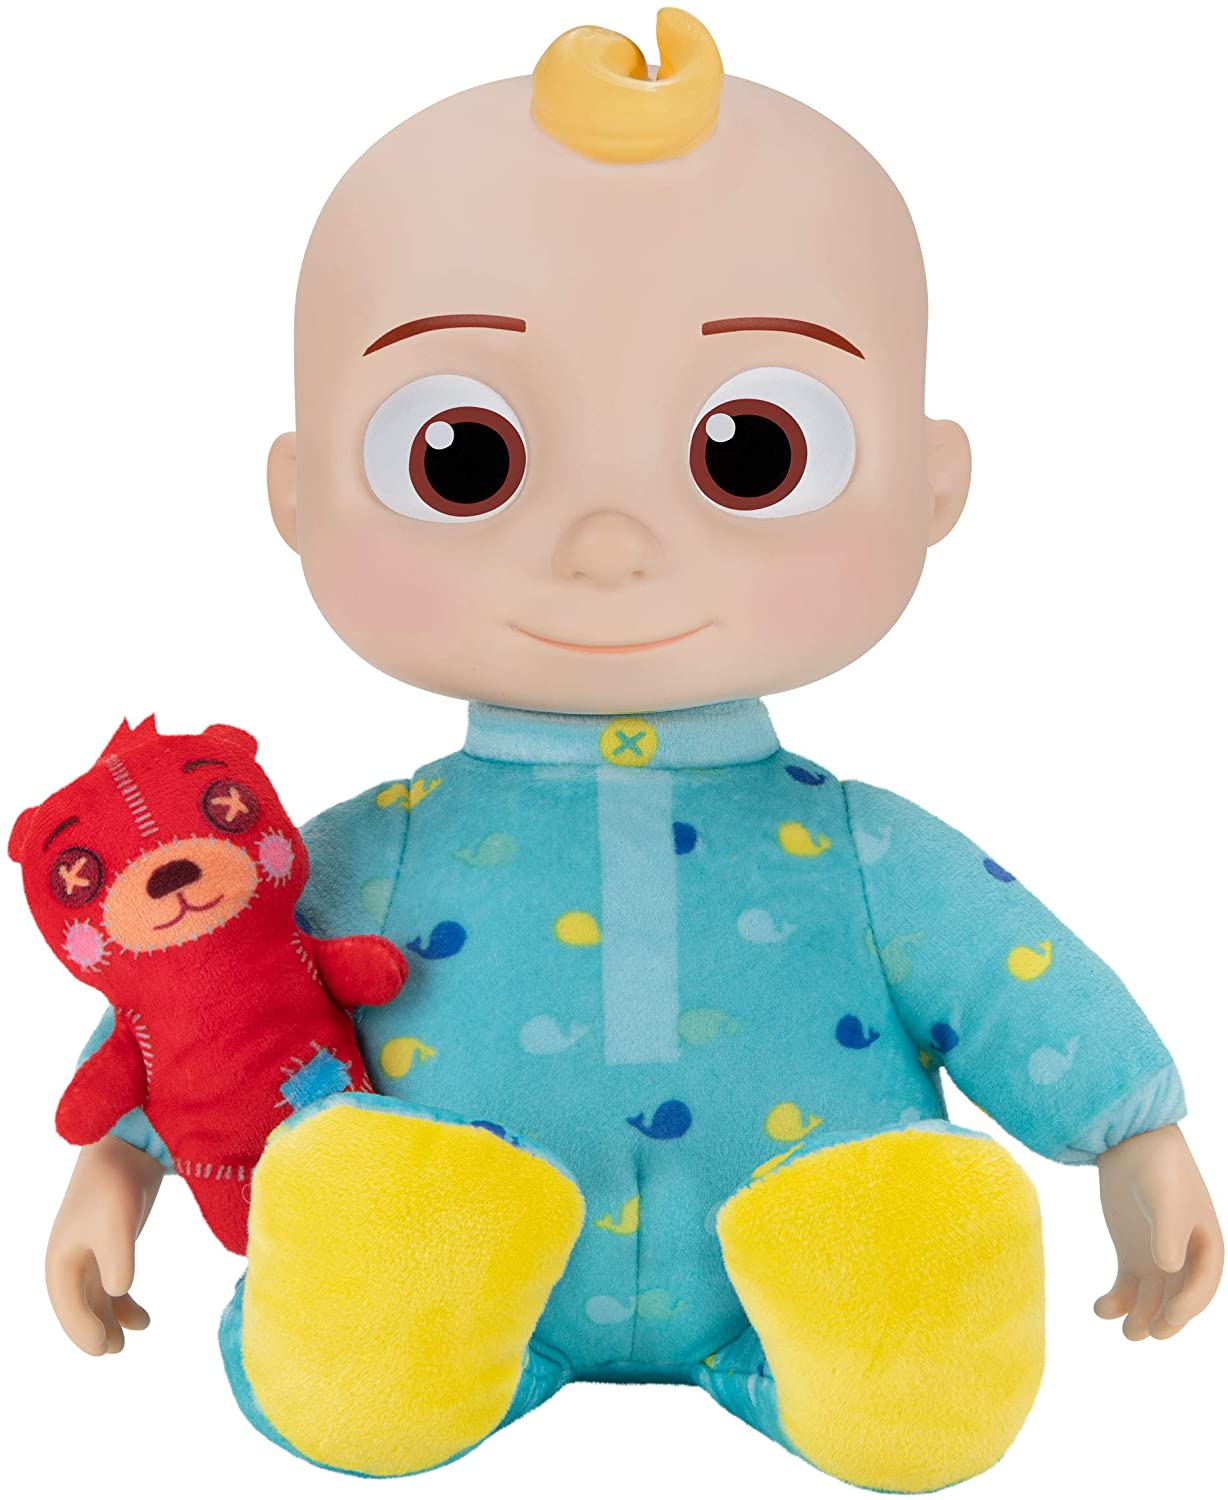 CoComelon Musical Bedtime JJ Plush Doll w/ Sounds & Phrases $12.95 + FS w/ Amazon Prime, FS on $25+ or Free Store Pickup at Target